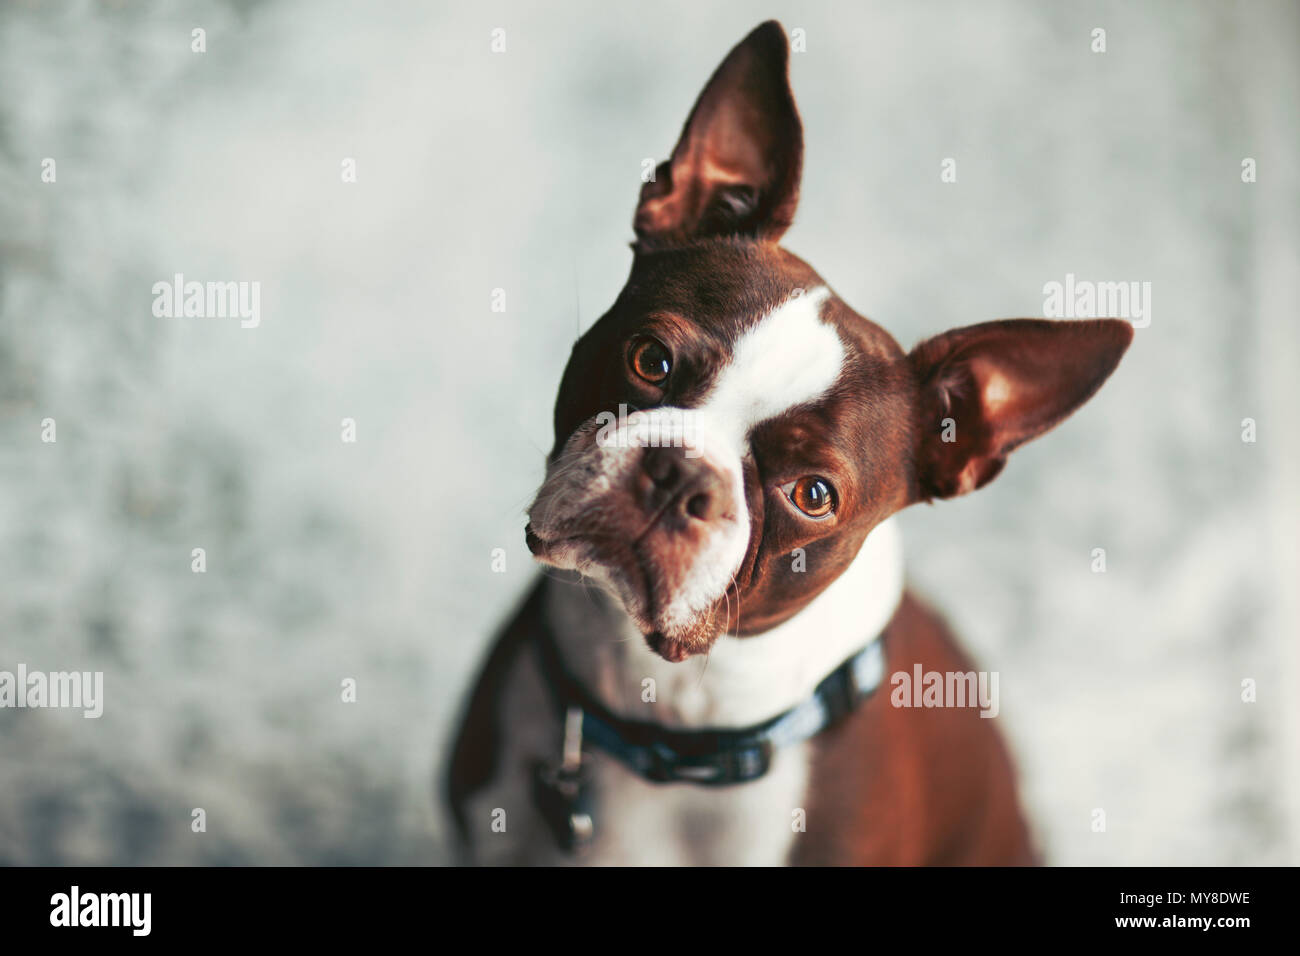 Portrait of Boston terrier, head cocked looking at camera Stock Photo